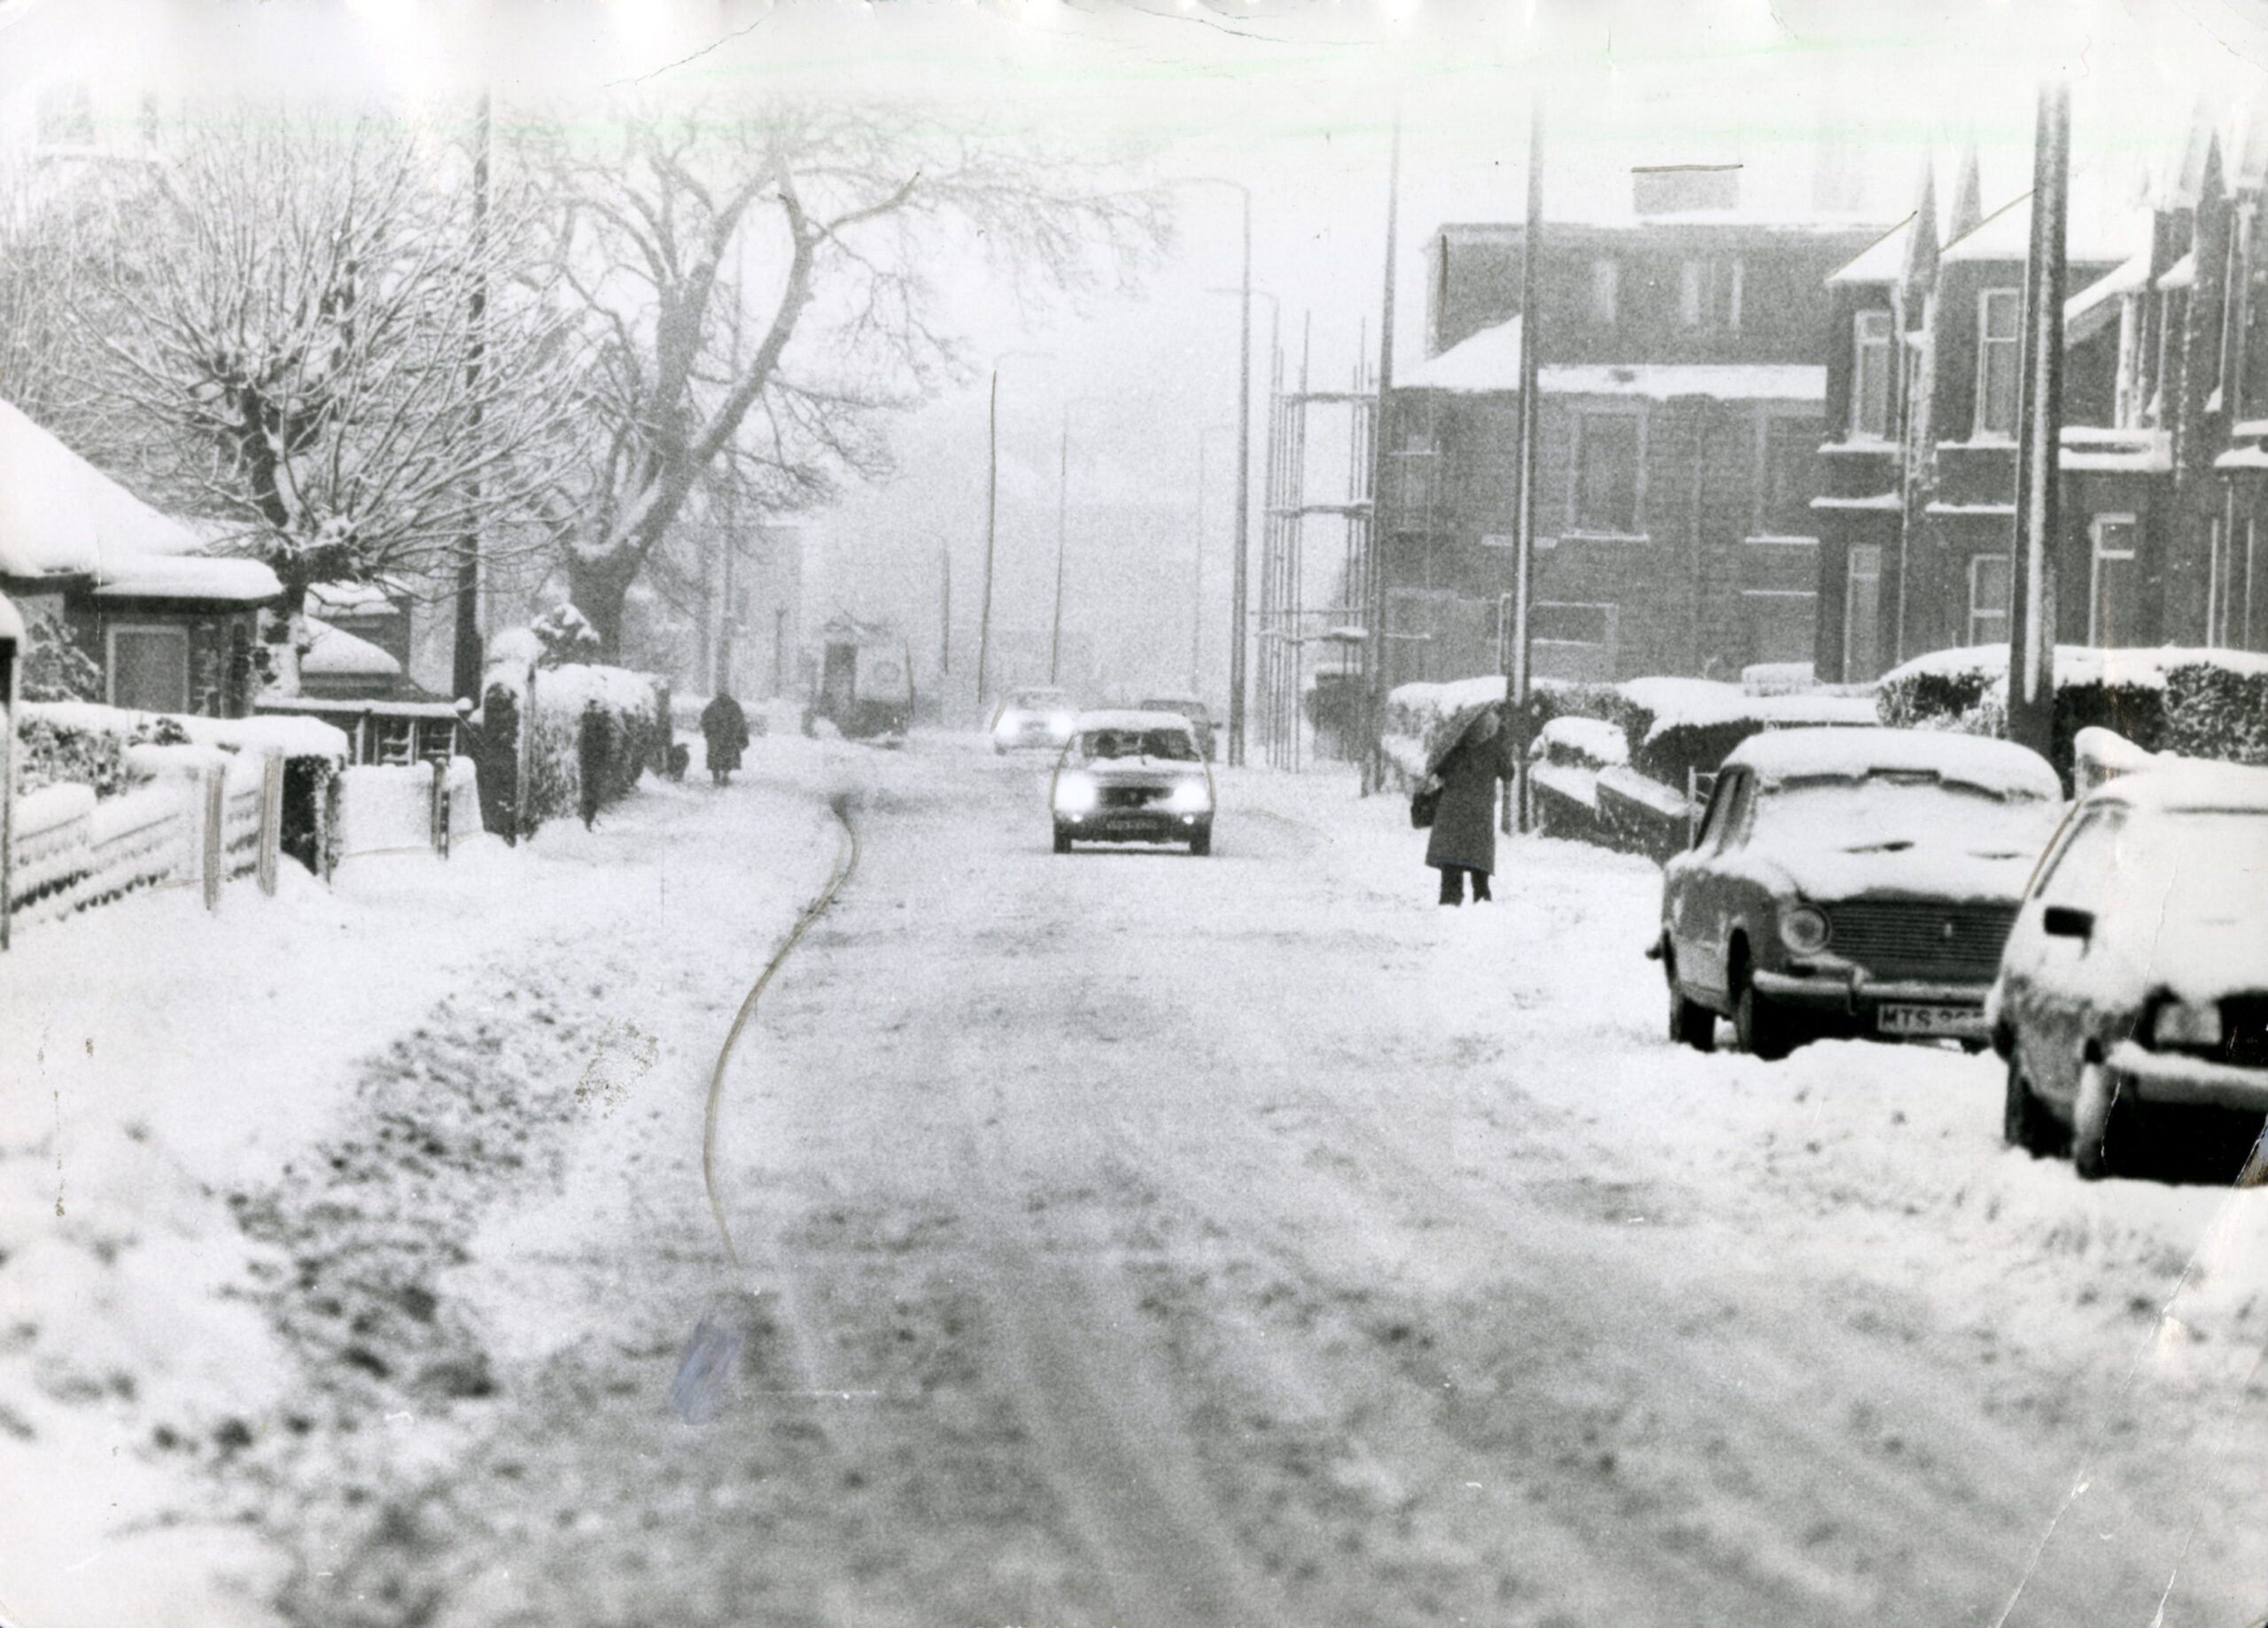 Snow on Strathmartine Road, Dundee, January 1984.